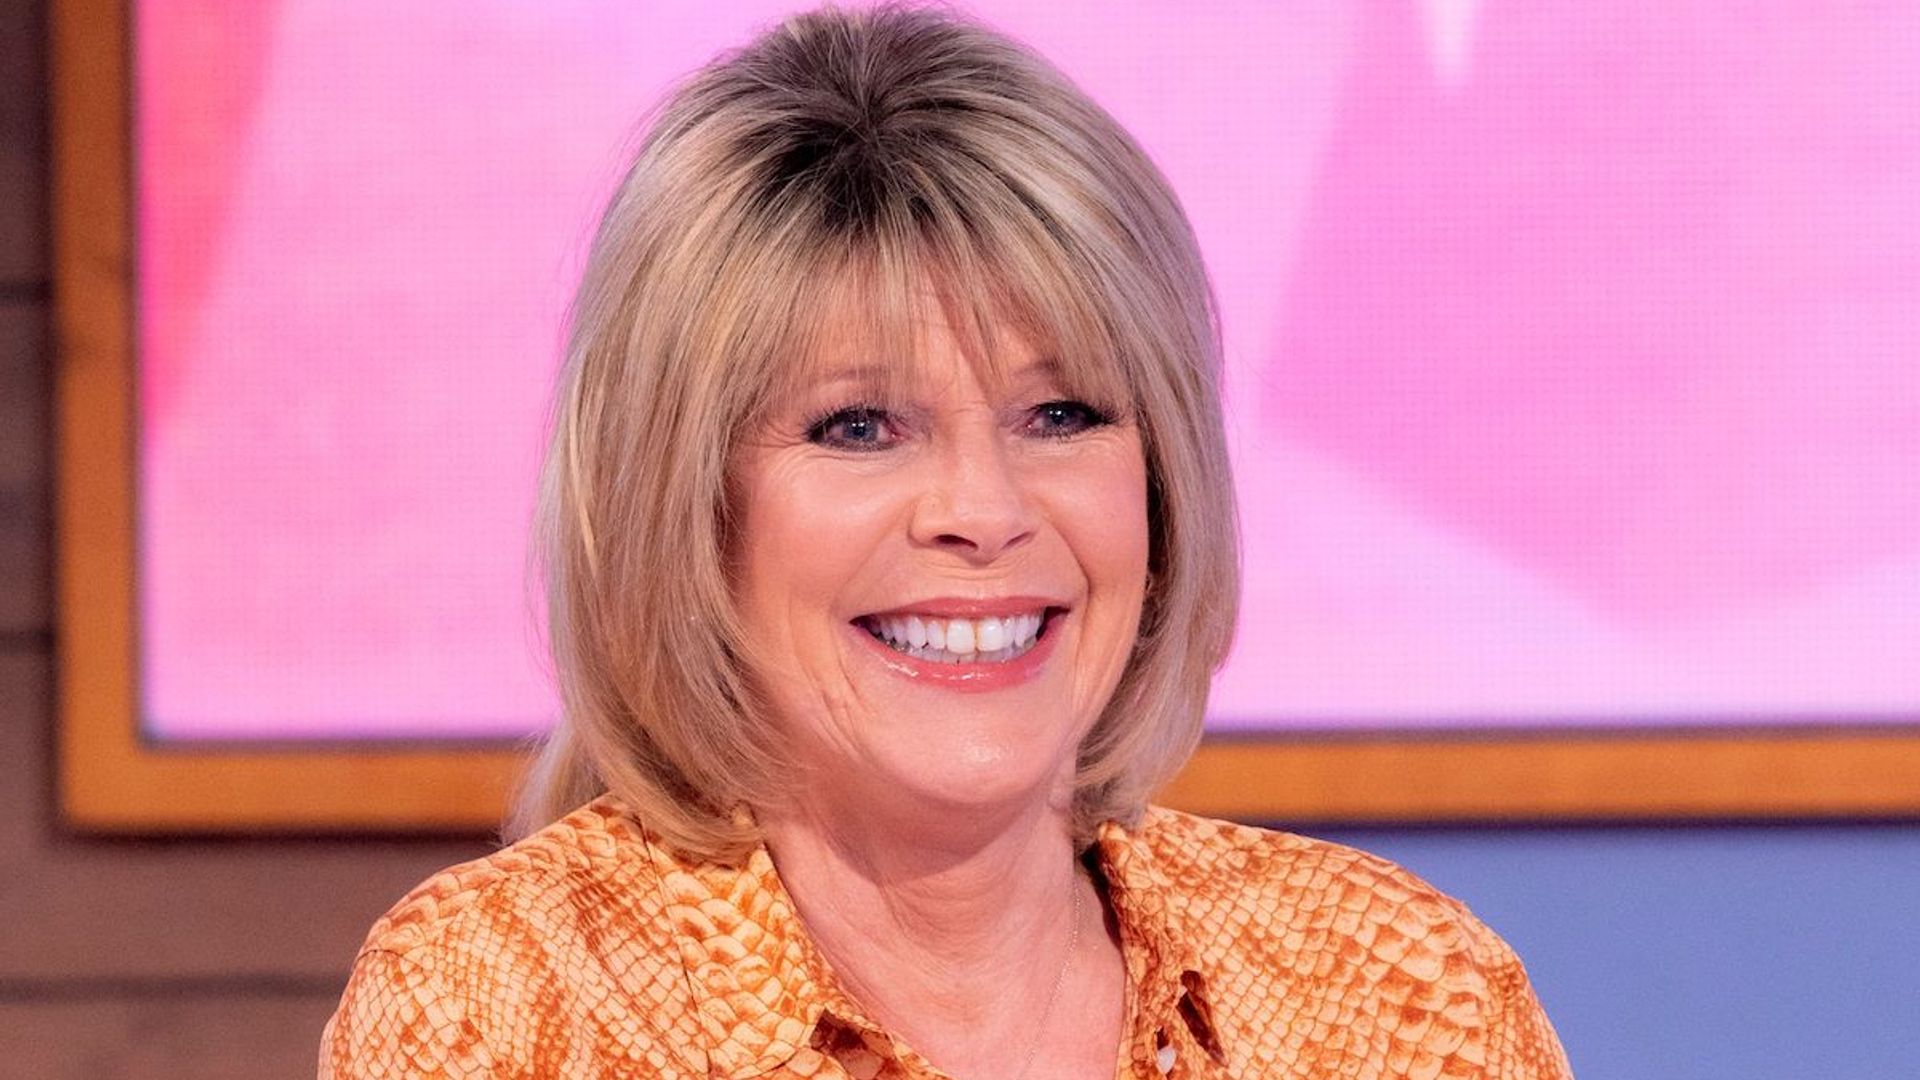 Ruth Langsford's unusual spaghetti bolognese ingredients will divide fans